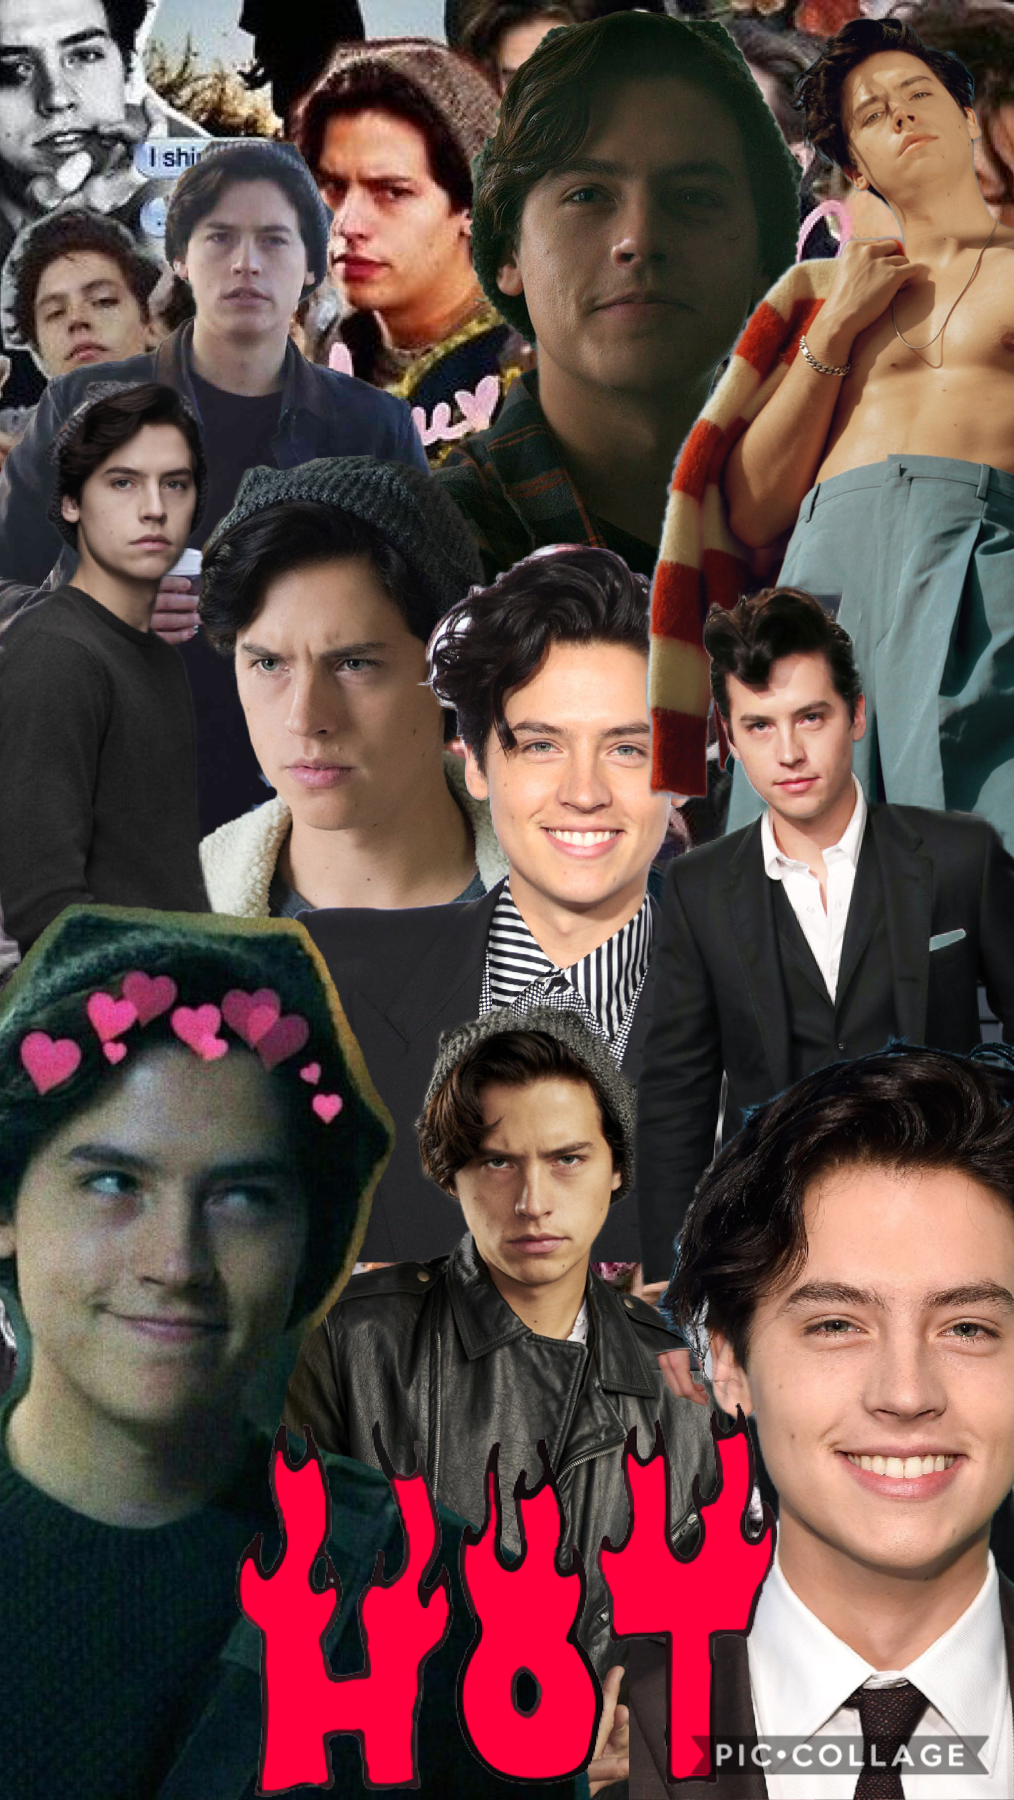 Cole Sprouse/Jughead Collage ❤️❤️😍😍🥰🥰😘😘 Enjoy!!!